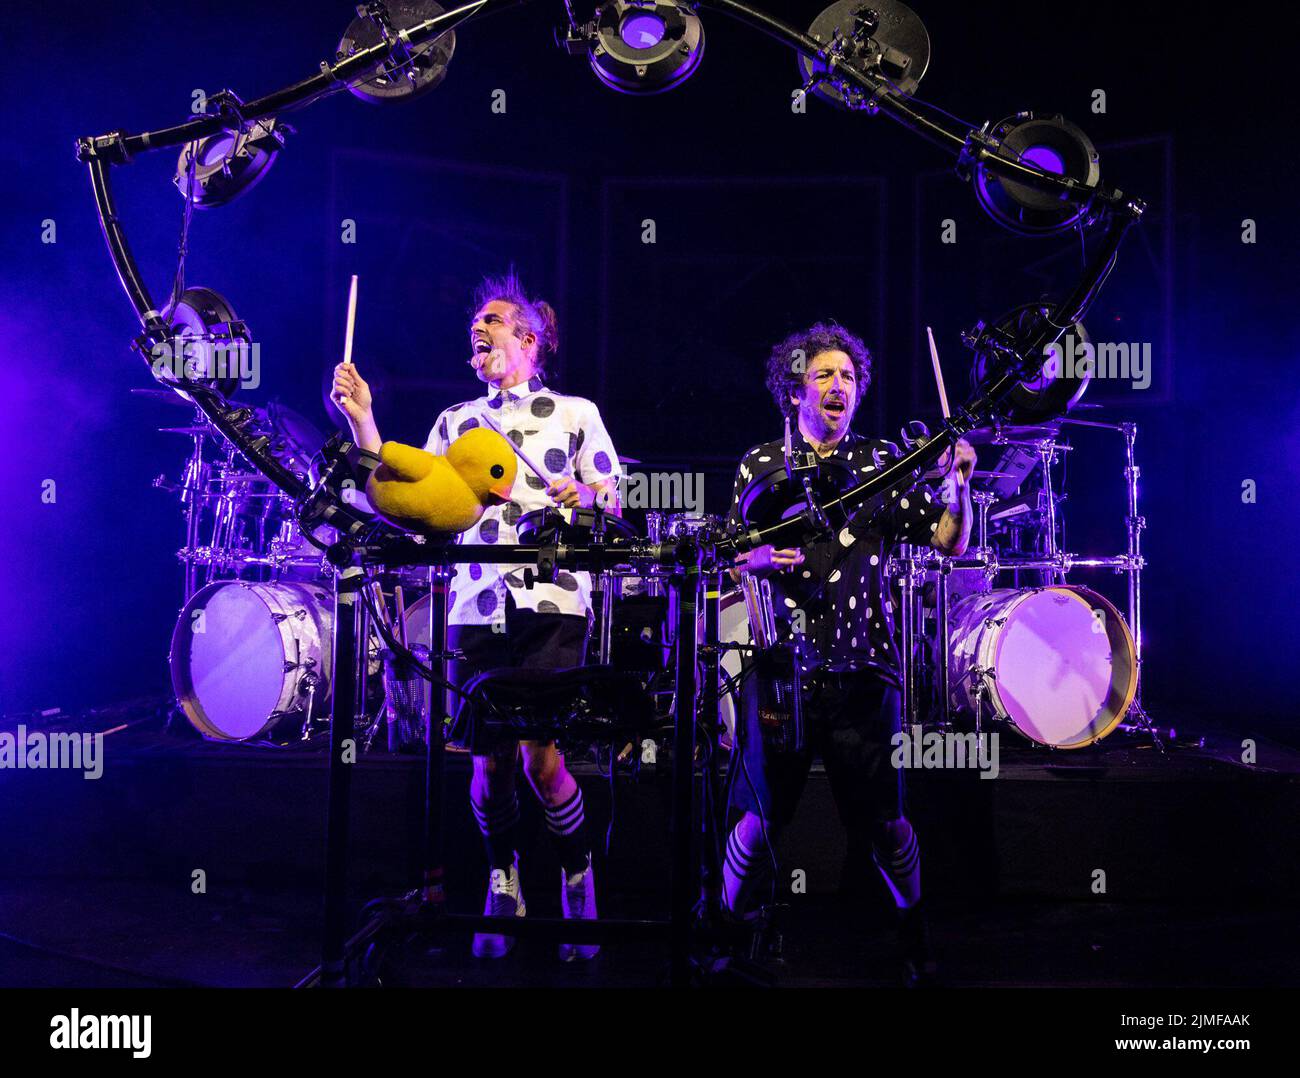 Edinburgh, United Kingdom. 06 August, 2022 Pictured: Percussion group, Fills Monkey who return to the Fringe with their exhilarating new show We Will Drum You. With over 250 shows making up this years’s programme, The Pleasance launches its 2022 Edinburgh Fringe Festival programme. Credit: Rich Dyson/Alamy Live News Stock Photo